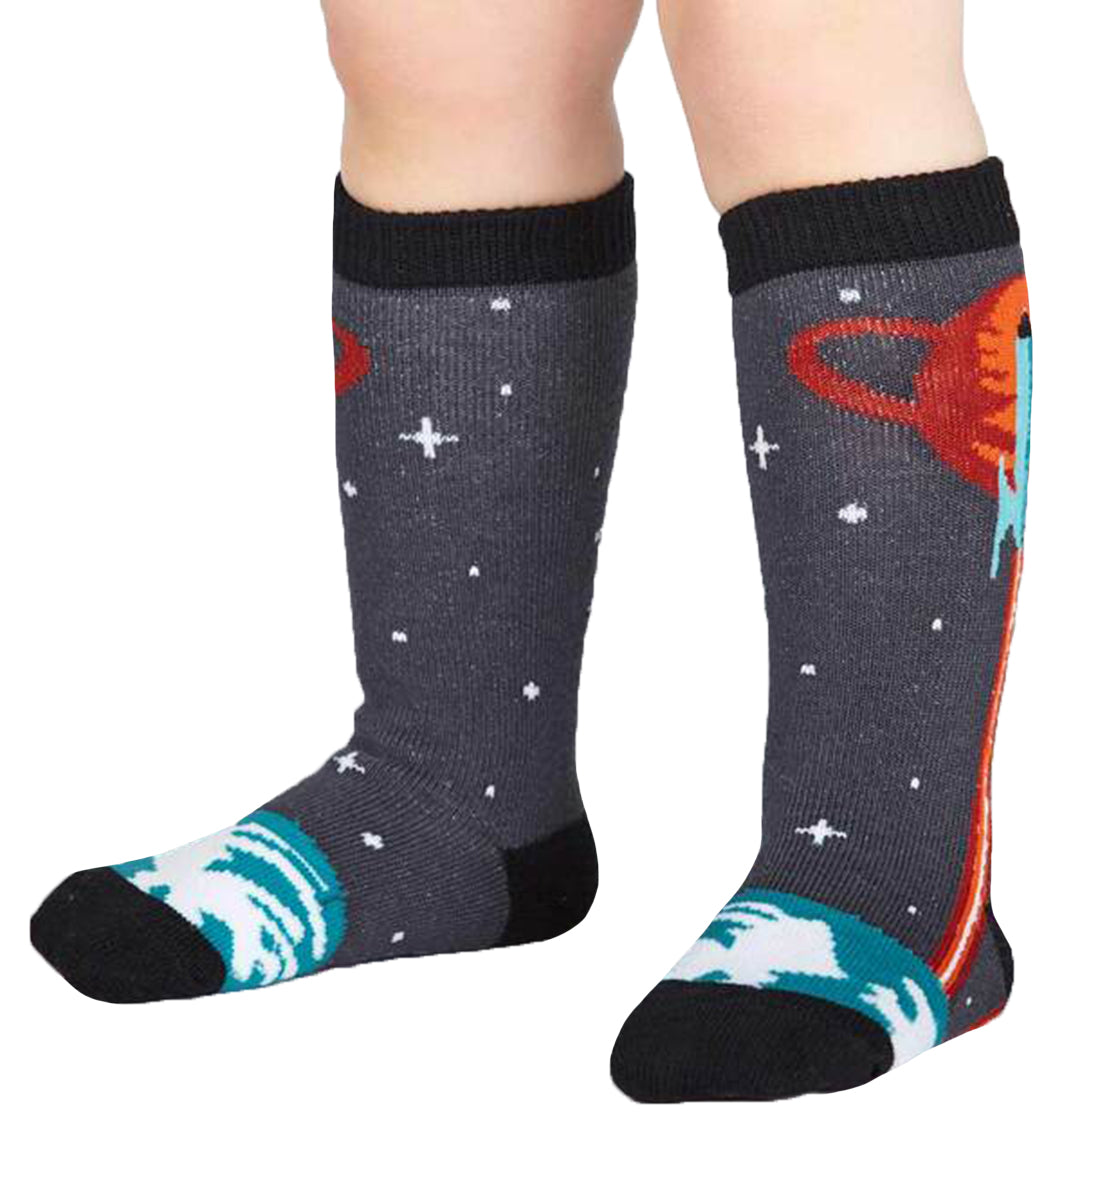 SOCK it to me Toddler Knee High Socks (tk0032),Launch from Earth - Launch from Earth,One Size